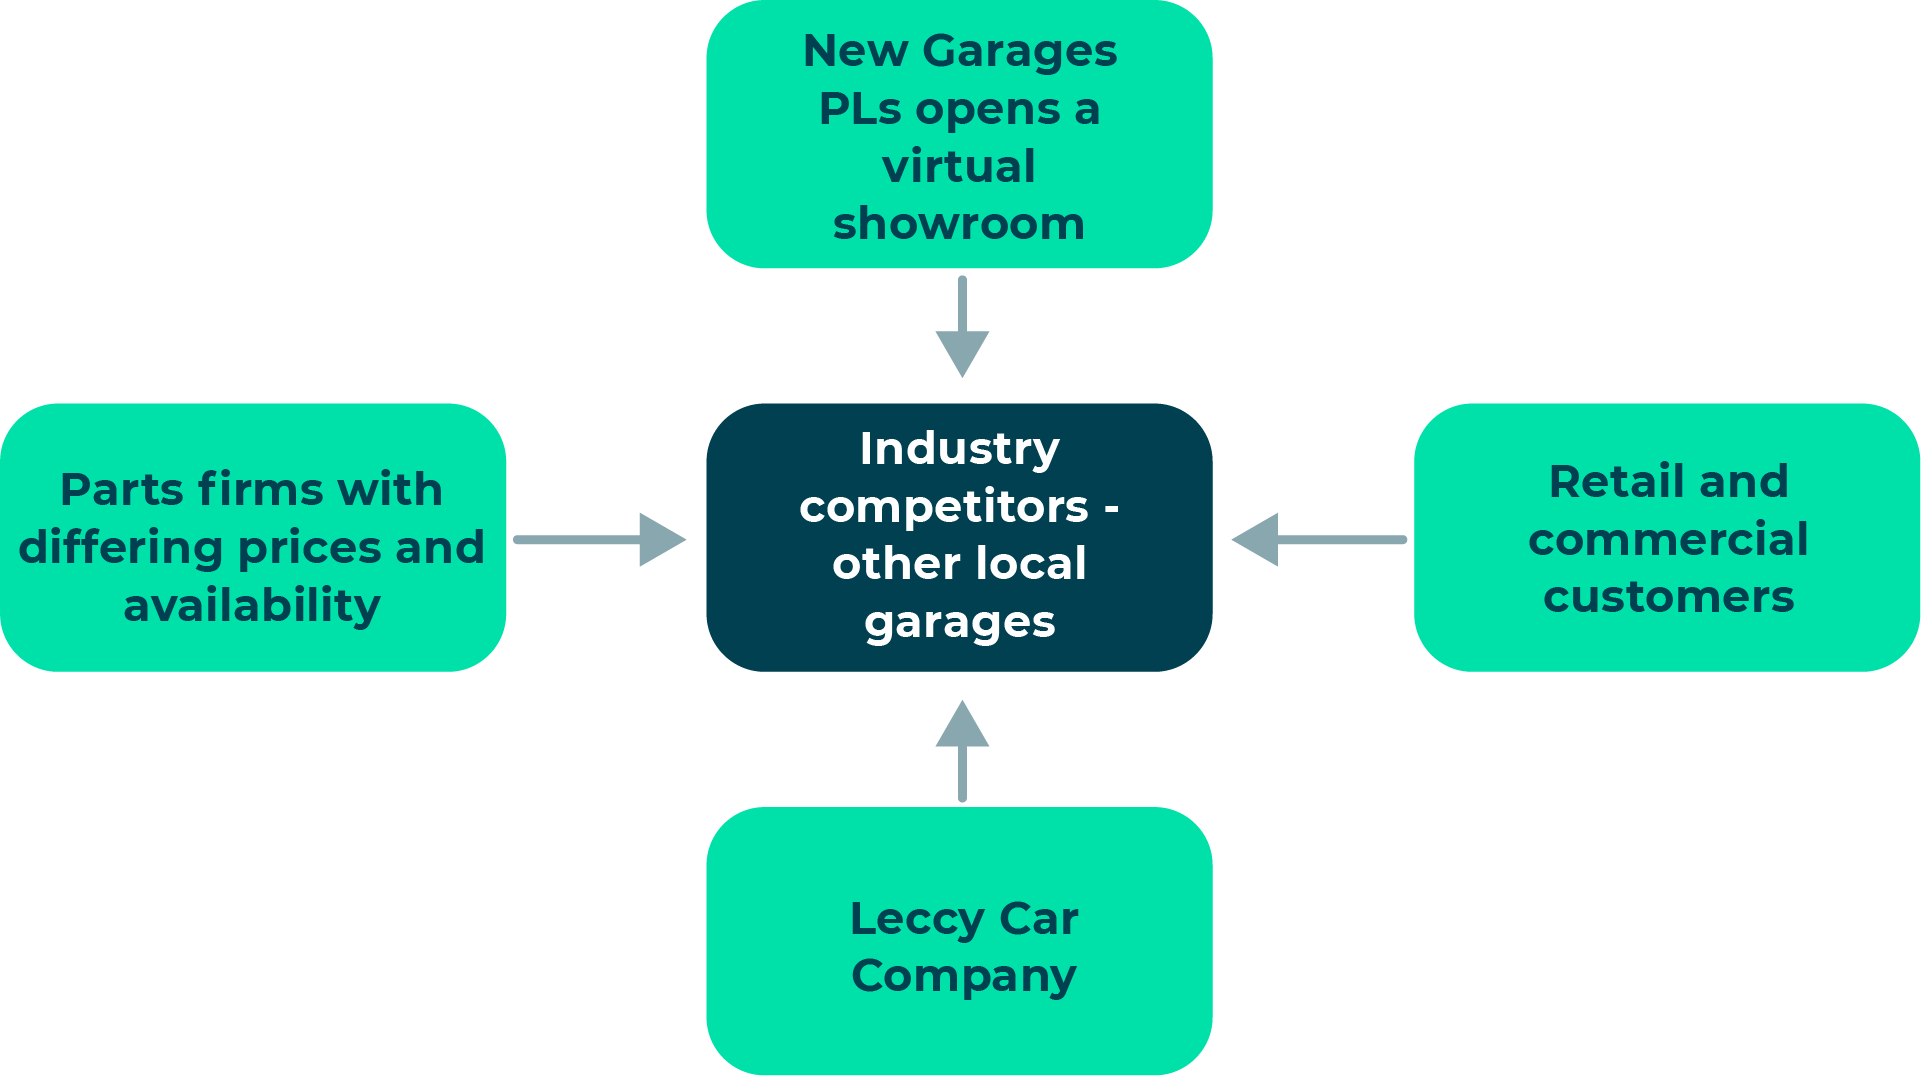 Diagram: Porter’s Five Forces applied to a car dealership. The threat of new entrants is a rival garage opening a virtual showroom. The bargaining power of suppliers is parts firms with difference prices and availability. The bargaining power of buyers is retail and commercial customers. The threat of substitute services are electric car companies and industry competitors are other local garages.